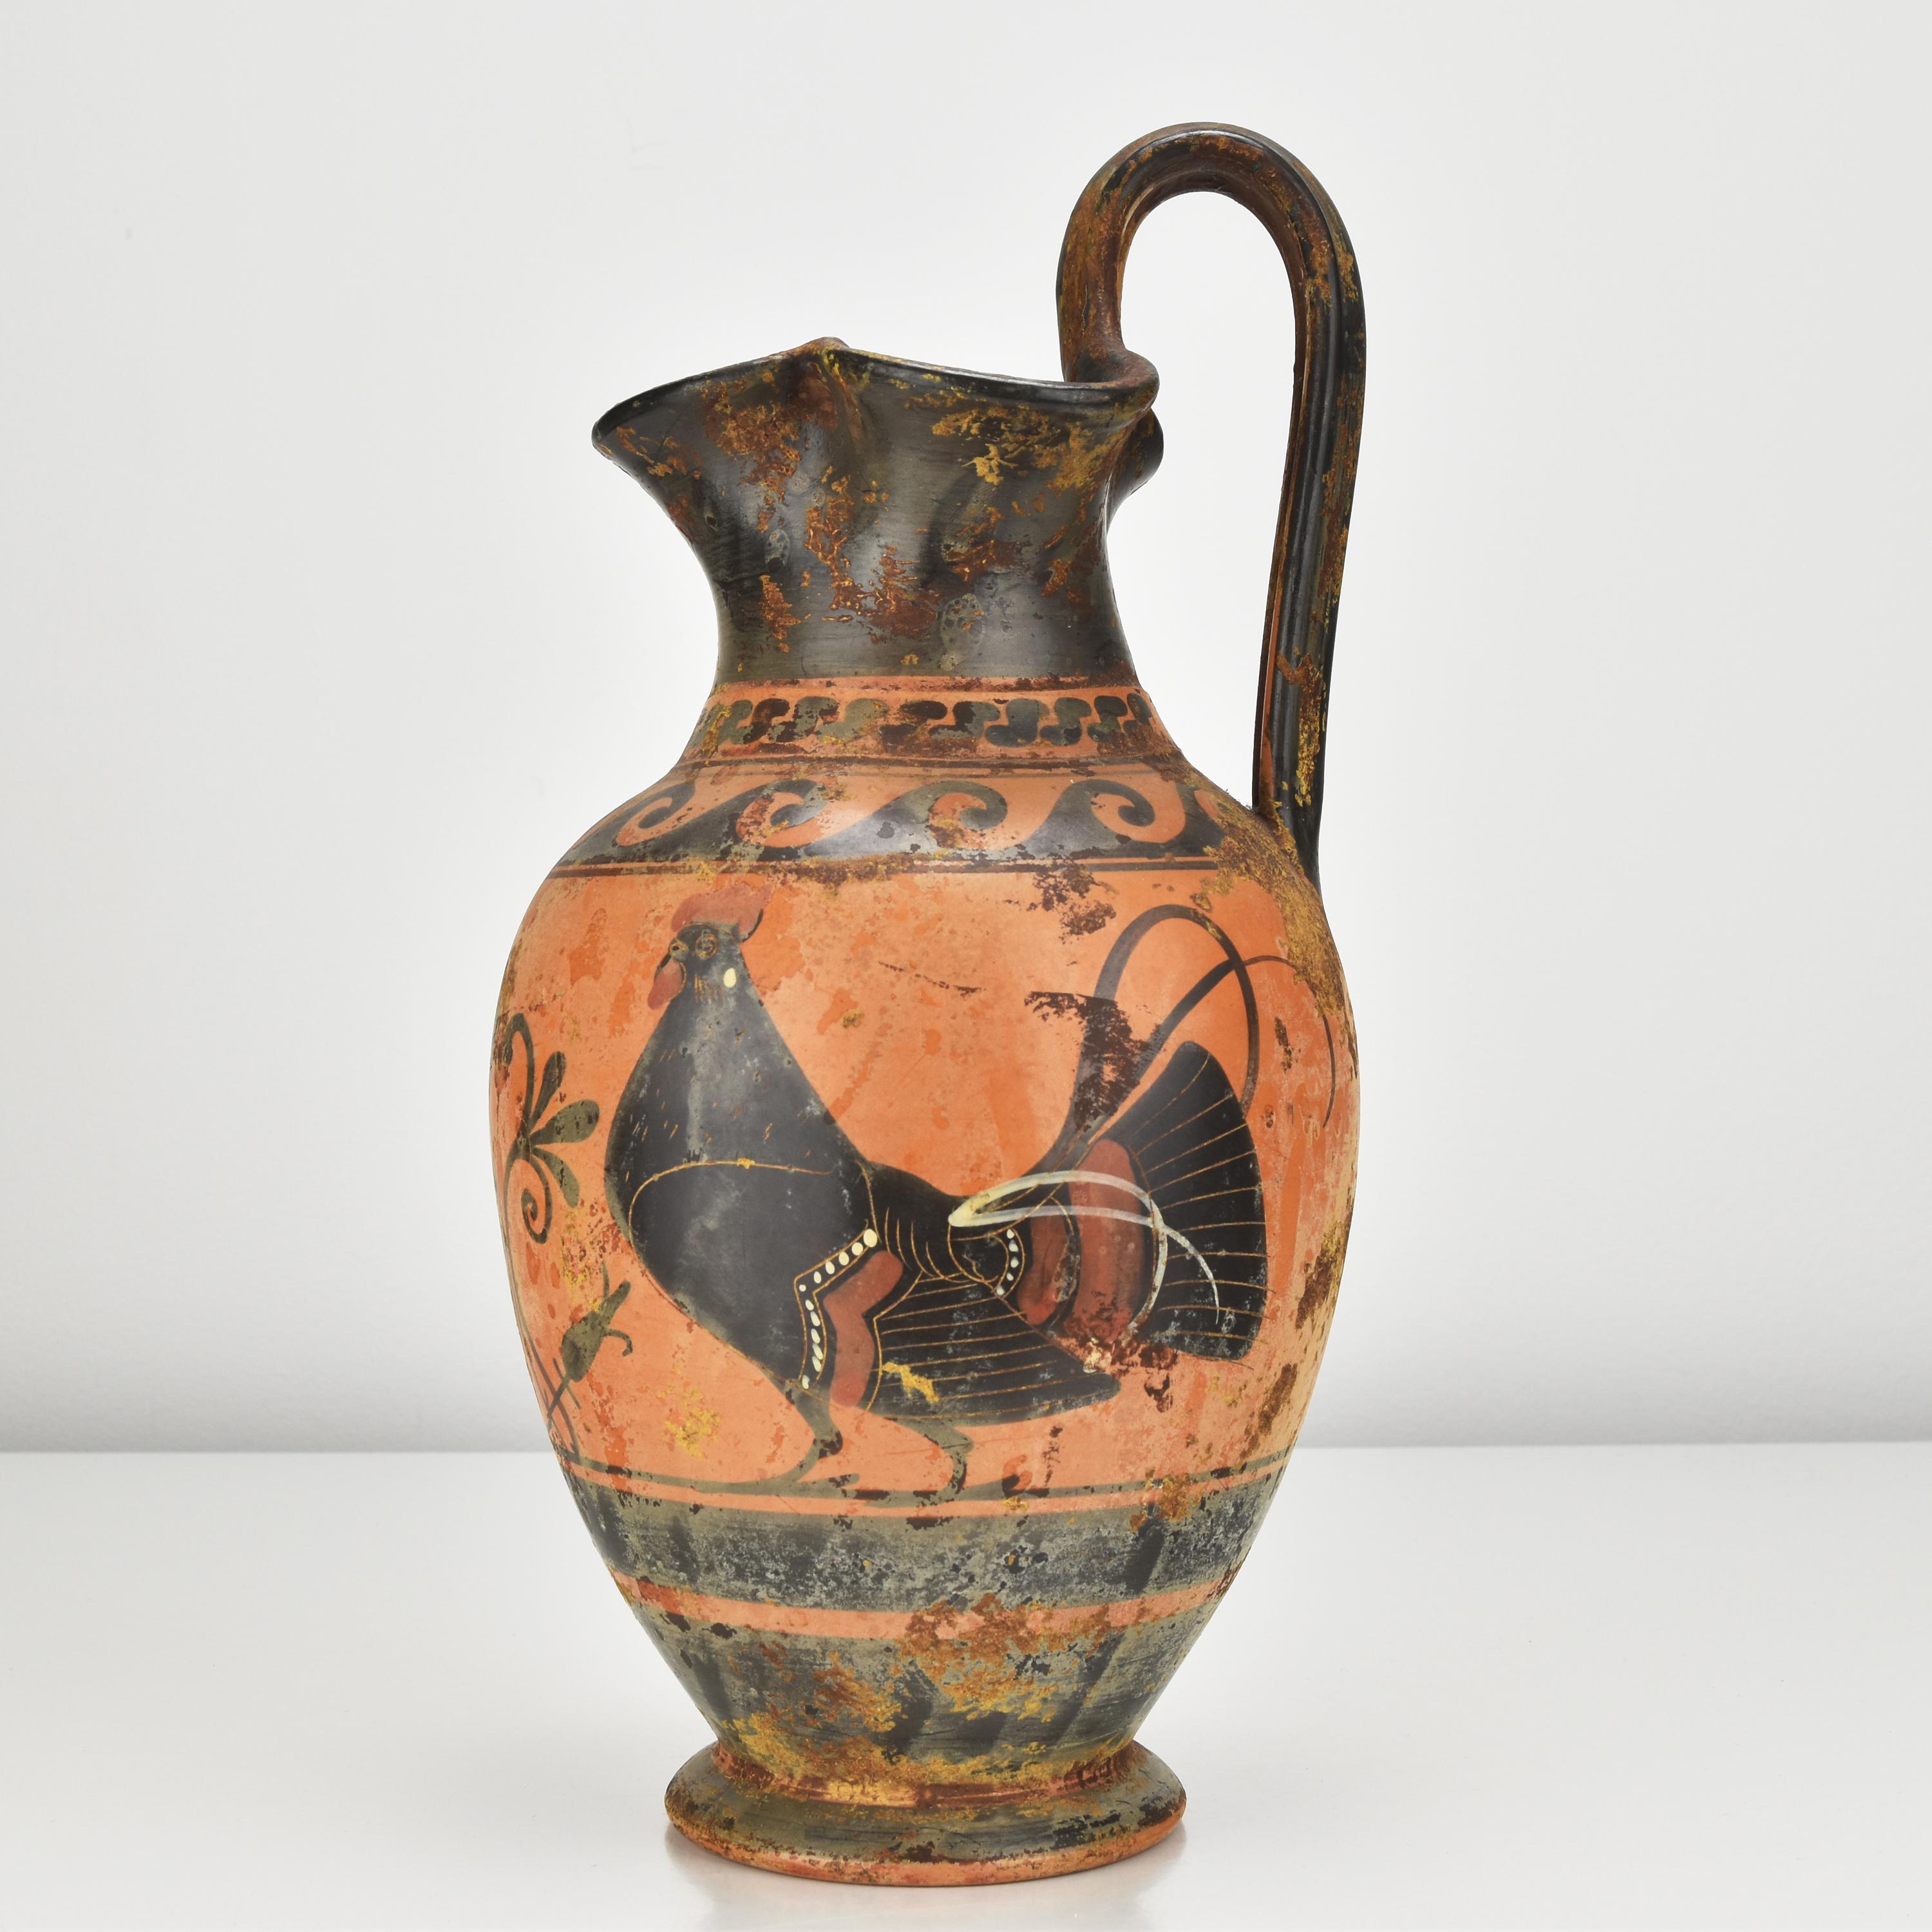 An excuisite handcrafted antique Grand Tour souvenir terracotta black-figure Oinochoe wine jug decorated with roosters and a lotus panel, made in Italy in the 19th century.

The roosters, in particular, were highly symbolic in ancient Greek